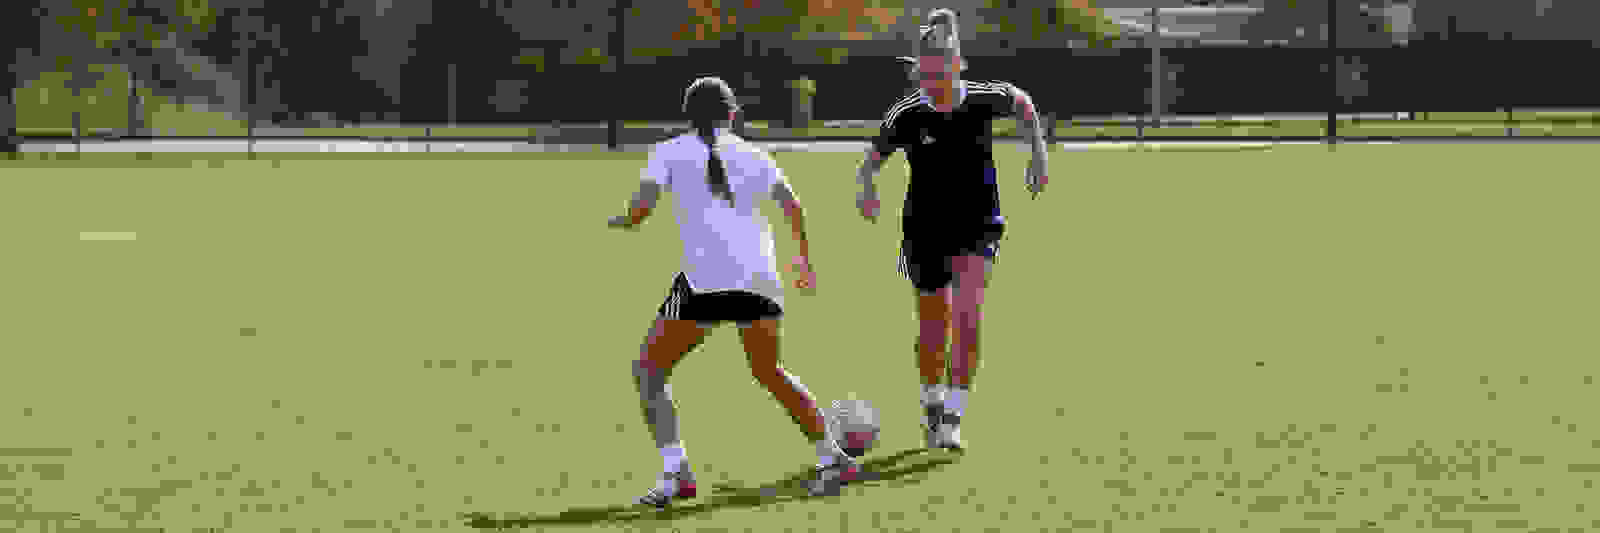 Mastering the Art of Dribbling: How to Dribble Without Looking at the Ball in Soccer